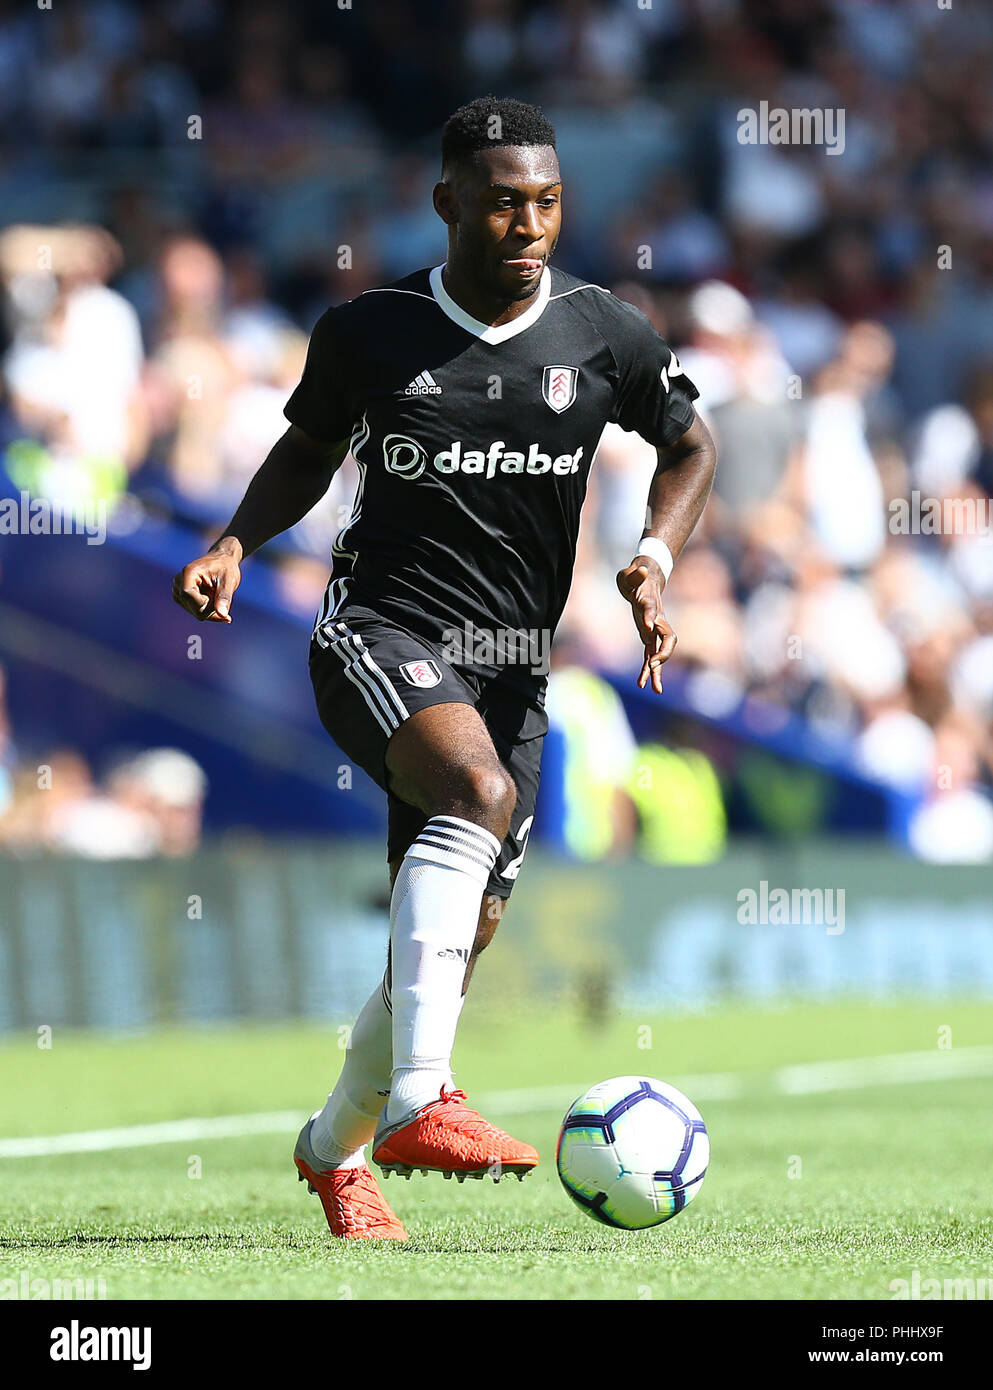 Fulham's Timothy Fosu-Mensah during the Premier League match at the AMEX Stadium, Brighton. PRESS ASSOCIATION Photo. Picture date: Saturday September 1, 2018. See PA story SOCCER Brighton. Photo credit should read: Gareth Fuller/PA Wire. RESTRICTIONS: No use with unauthorised audio, video, data, fixture lists, club/league logos or 'live' services. Online in-match use limited to 120 images, no video emulation. No use in betting, games or single club/league/player publications. Stock Photo